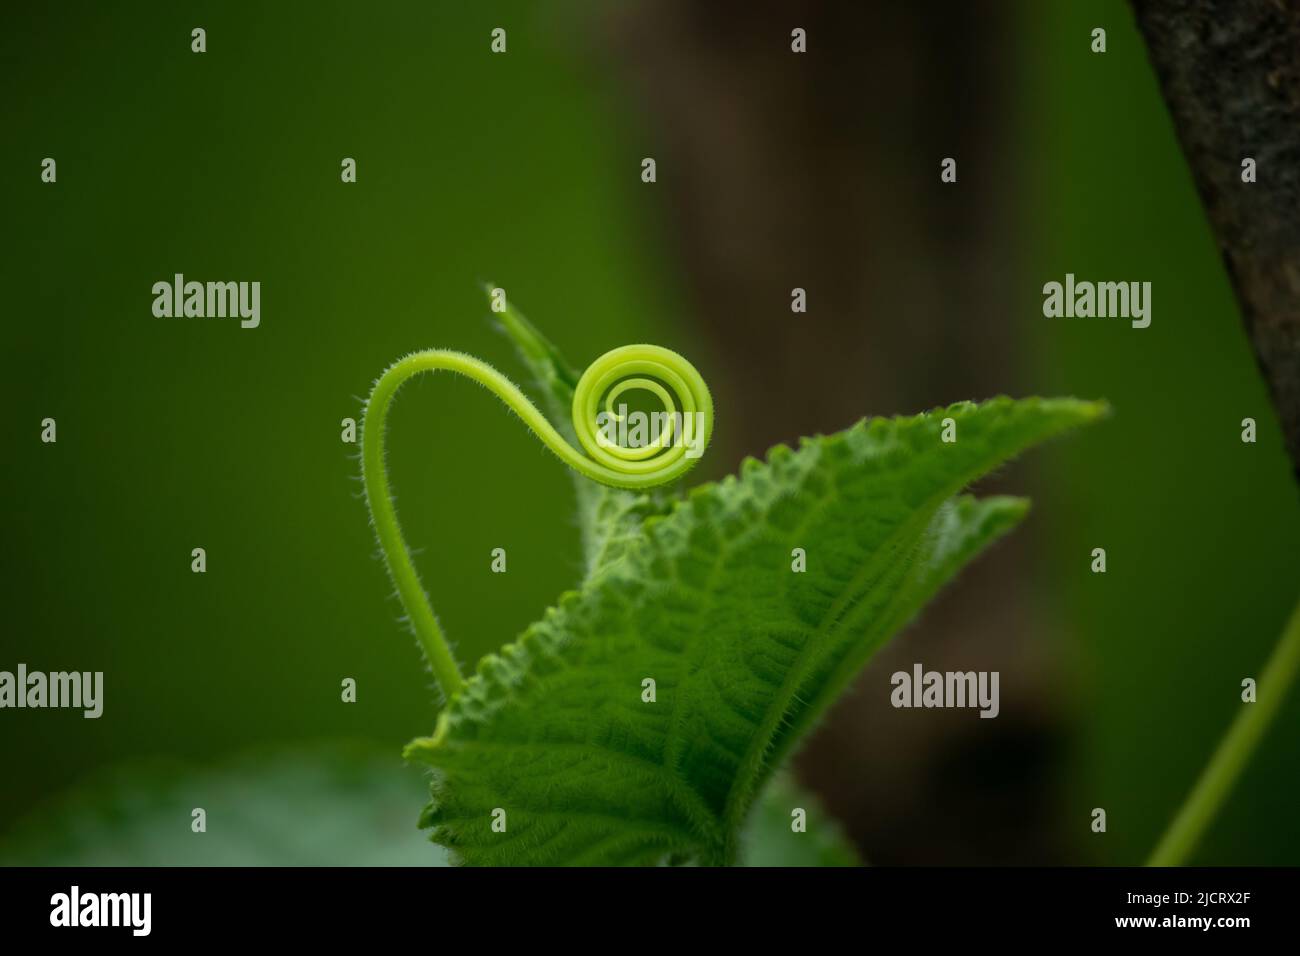 Rounded climber, tendril of cucumber plant in green background. Stock Photo